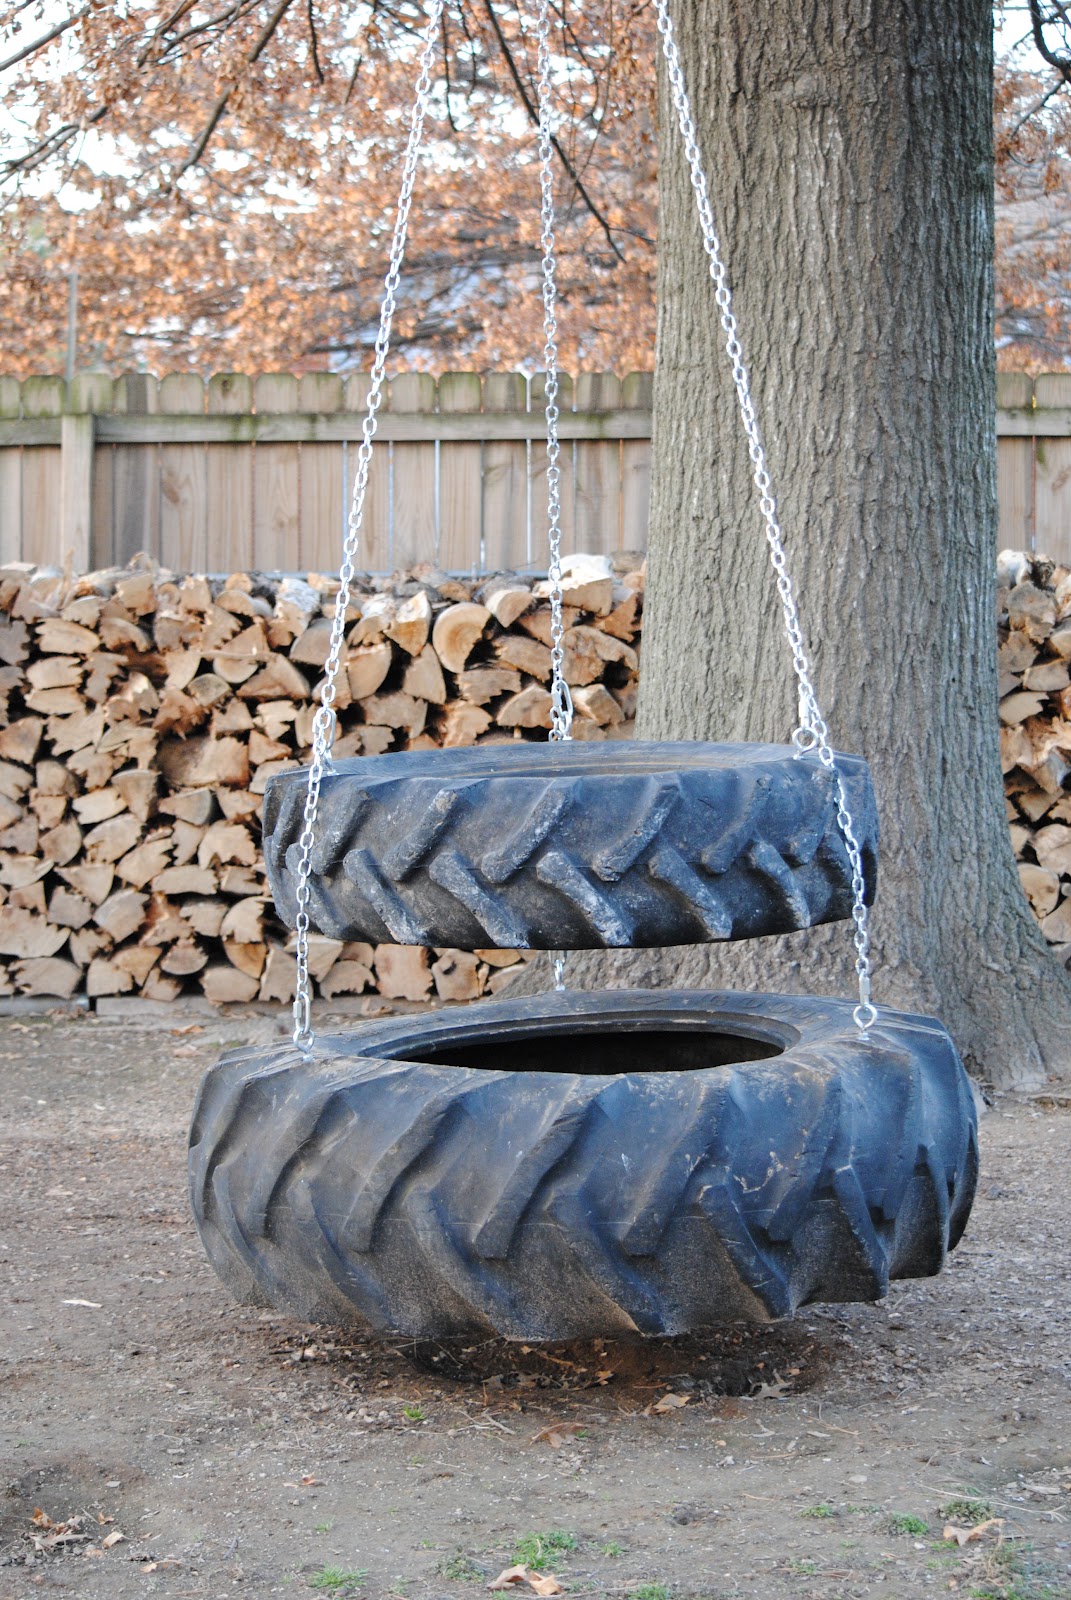 Tire twister swing made from tractor tires